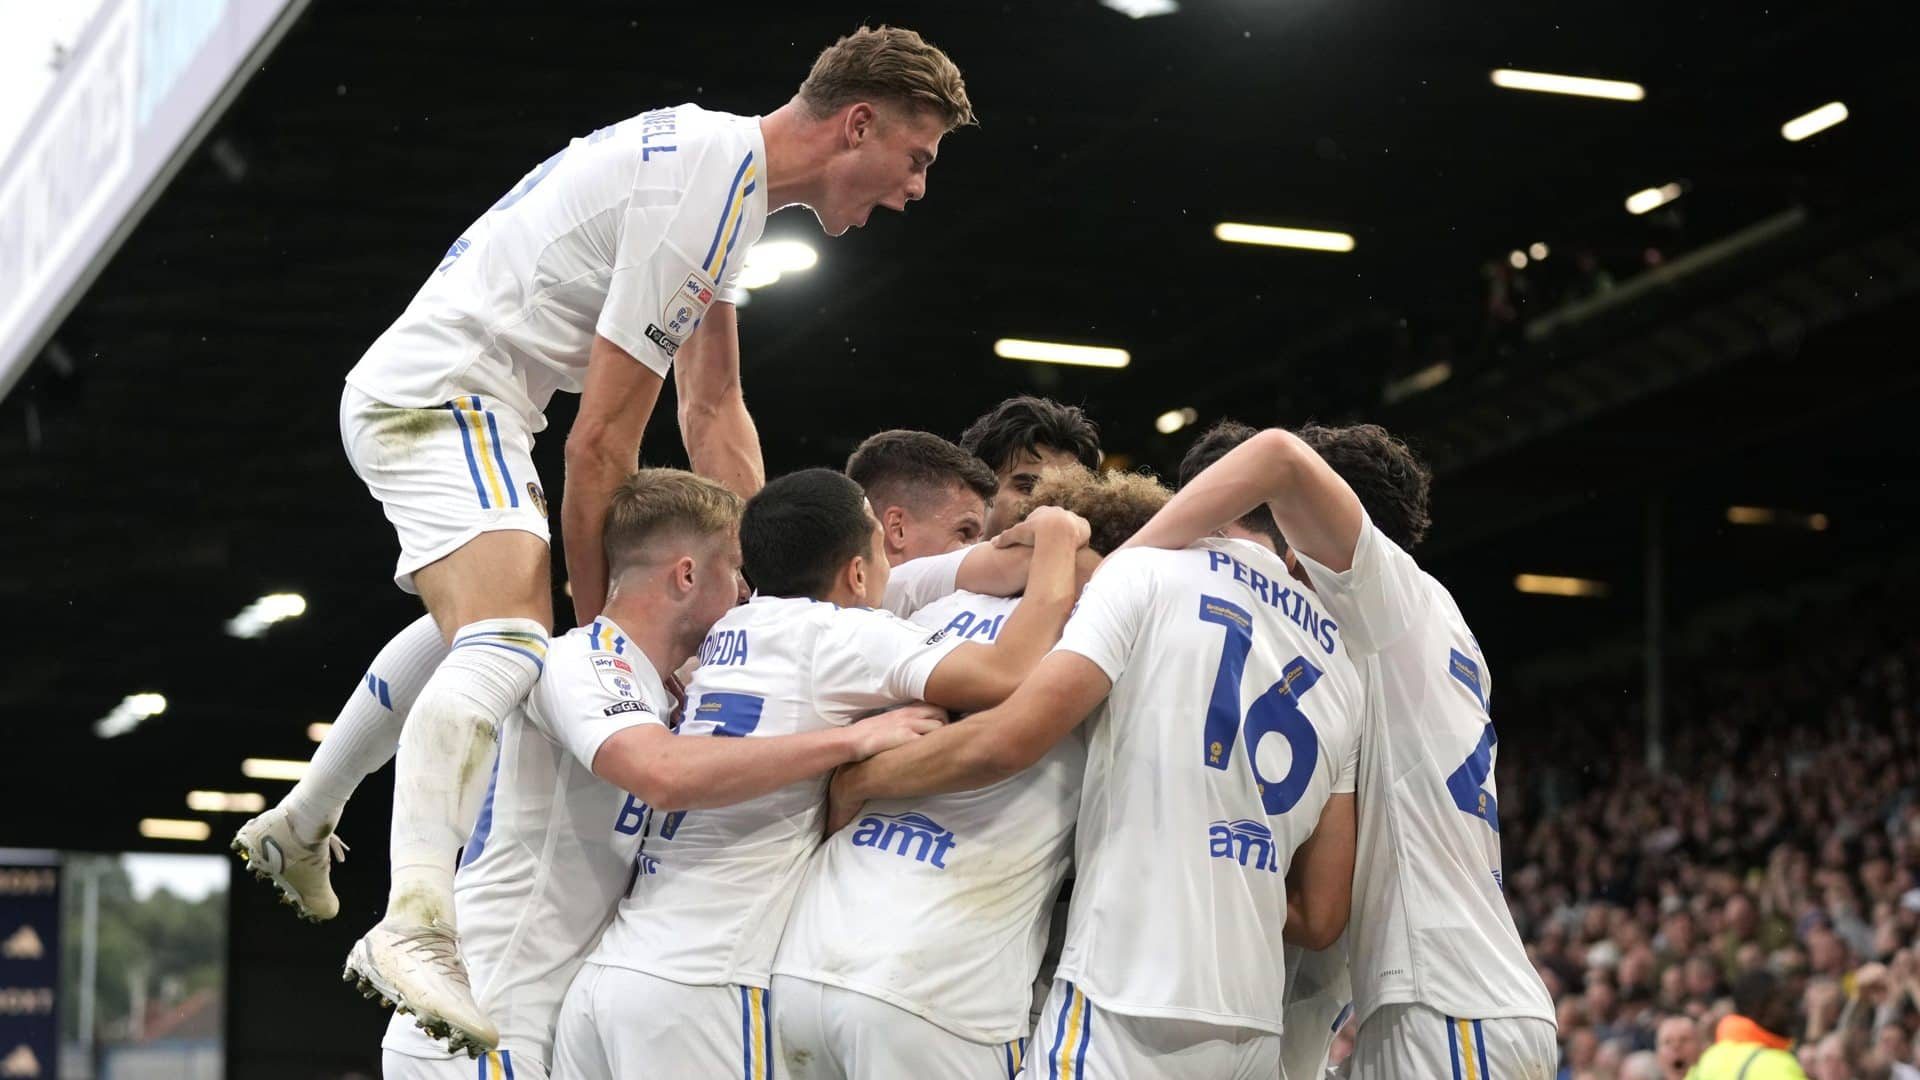 United's players are in a huddle celebrating the equaliser against Cardiff, unaware that one huge Charlie Cresswell is leaping over and into them with a single bound